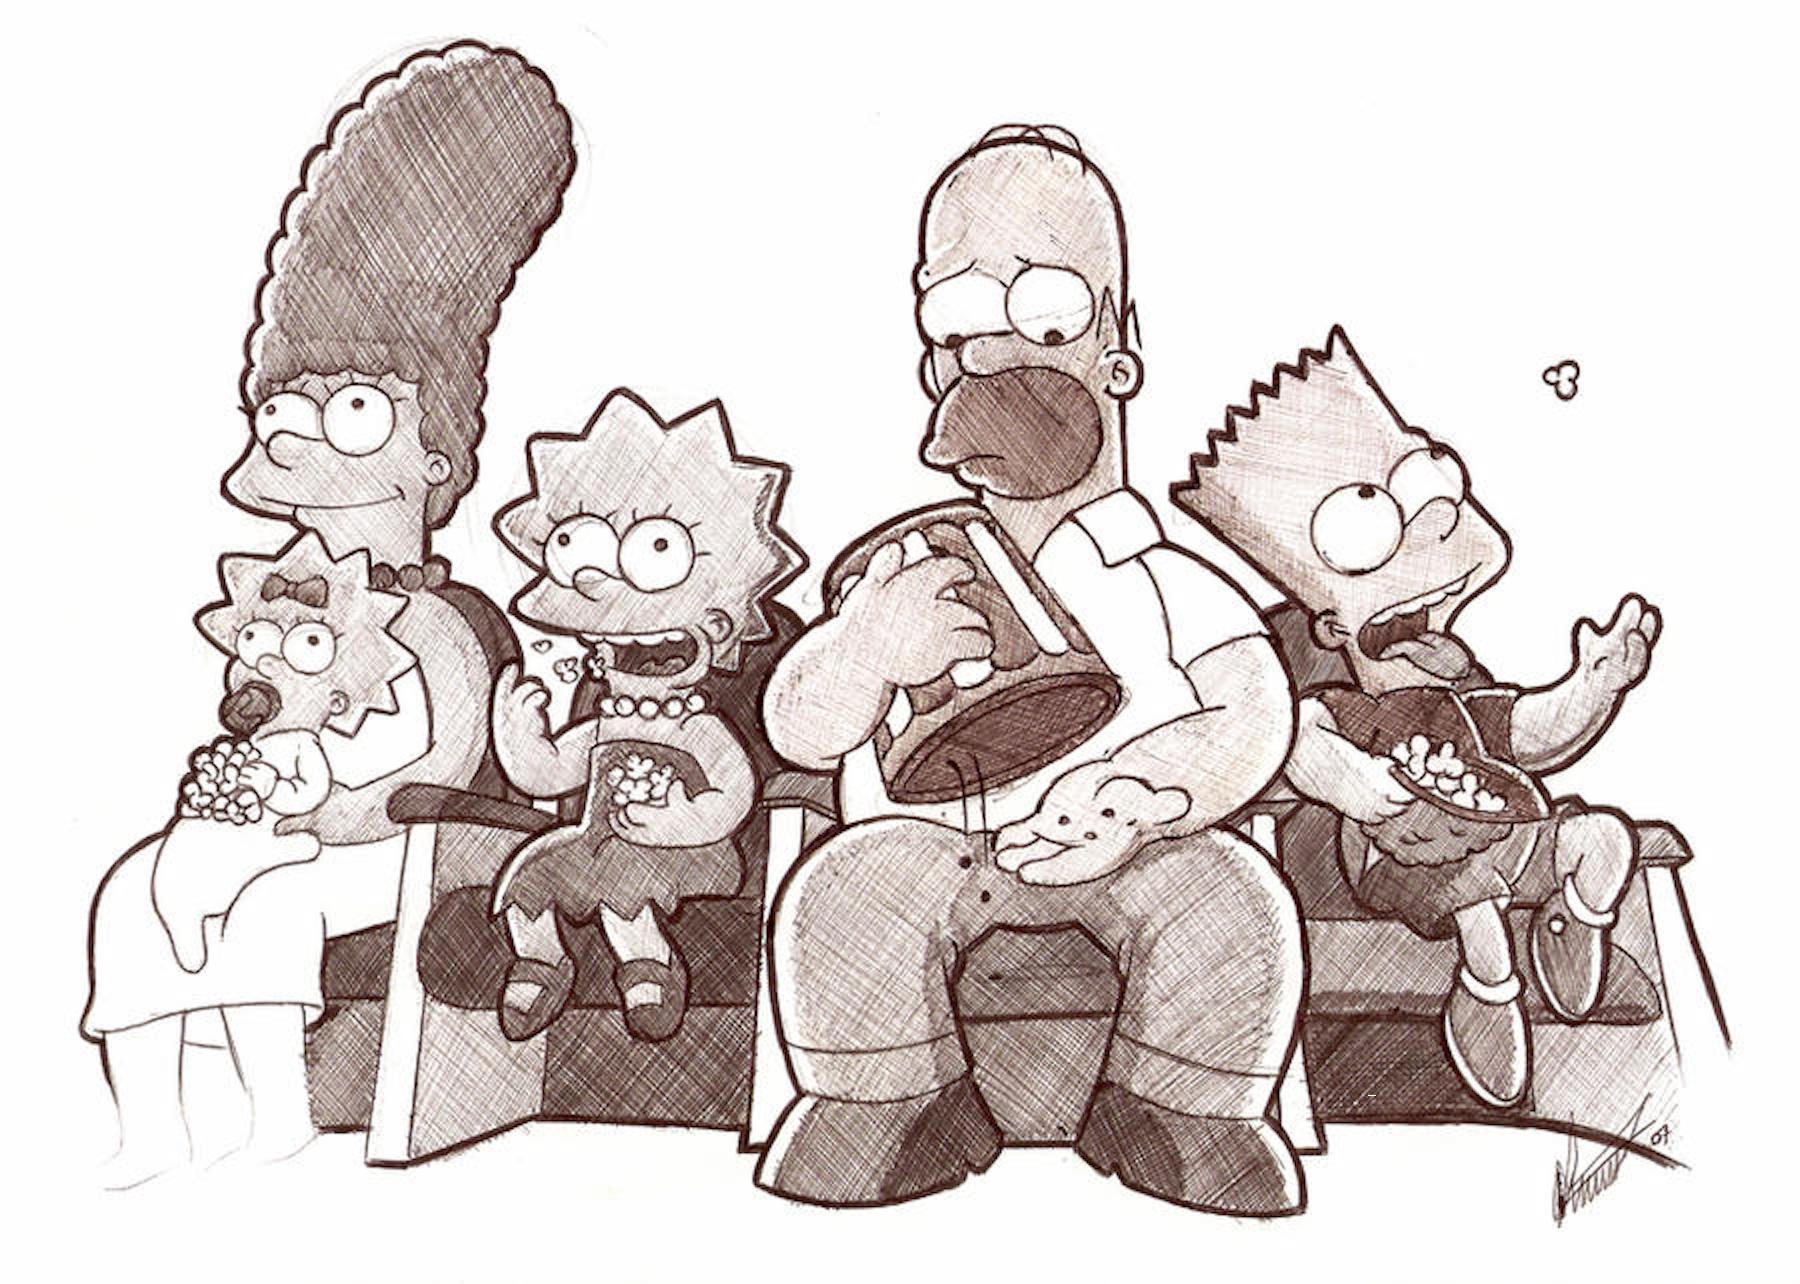 Fan art of the Simpsons family eating popcorn in theater seats, with Homer looking sad it's all gone.